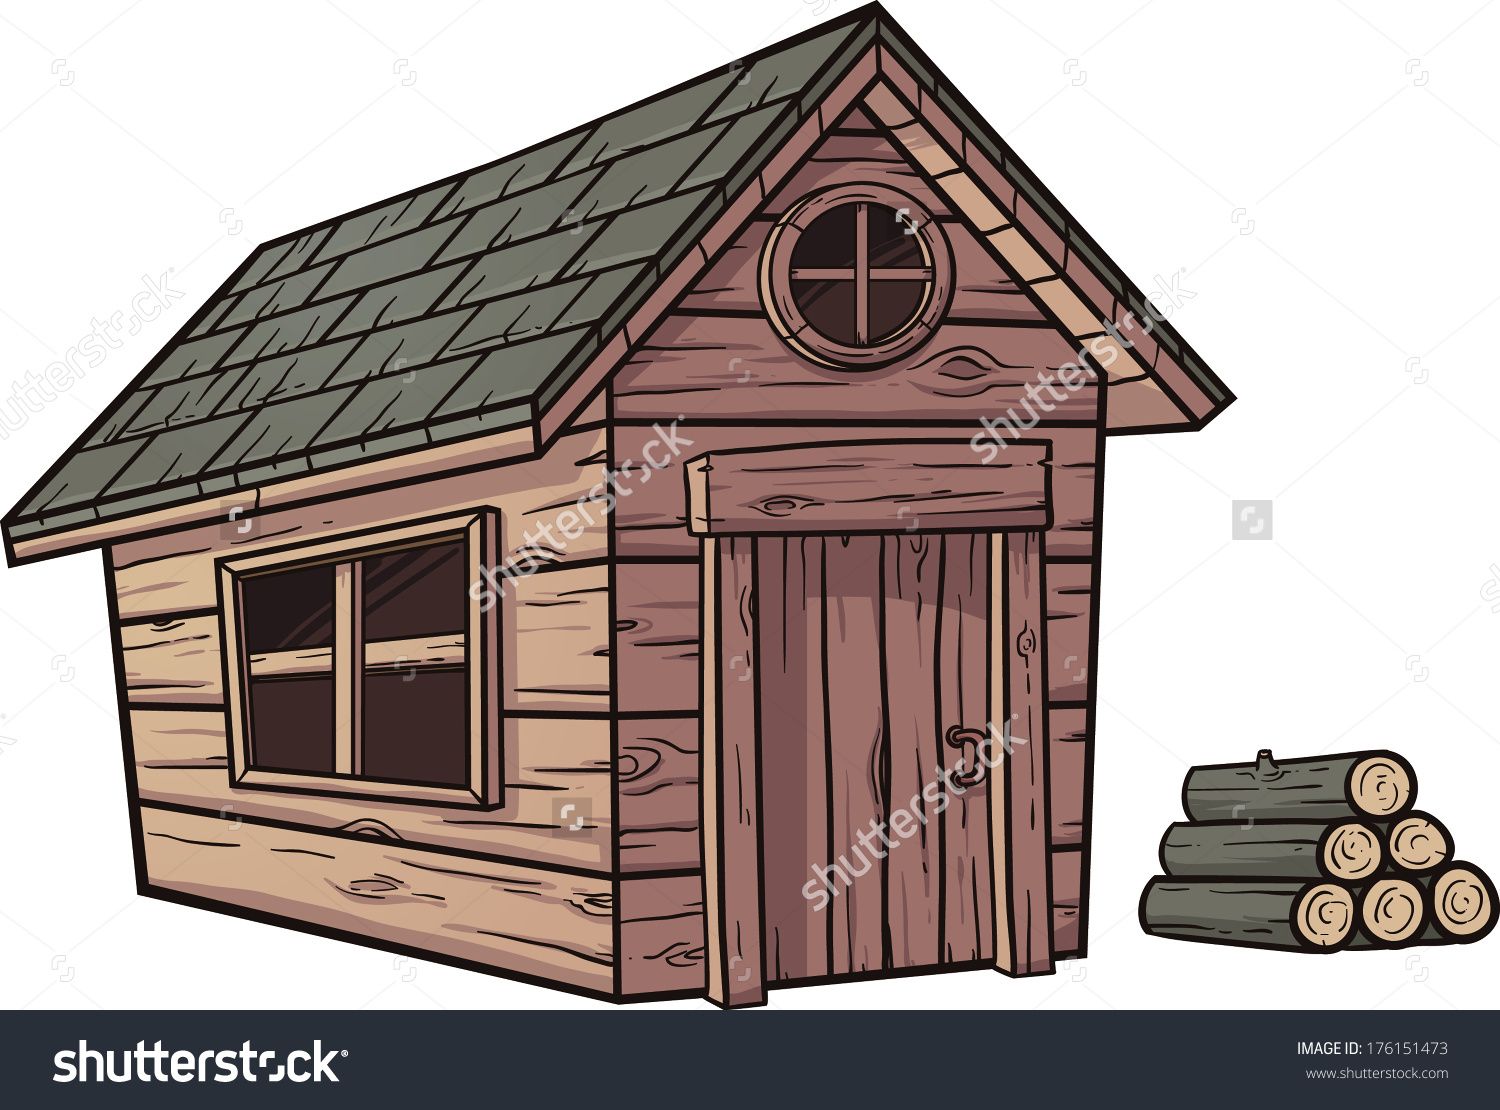 Cottage clipart wooden cabin. Small cartoon log stock